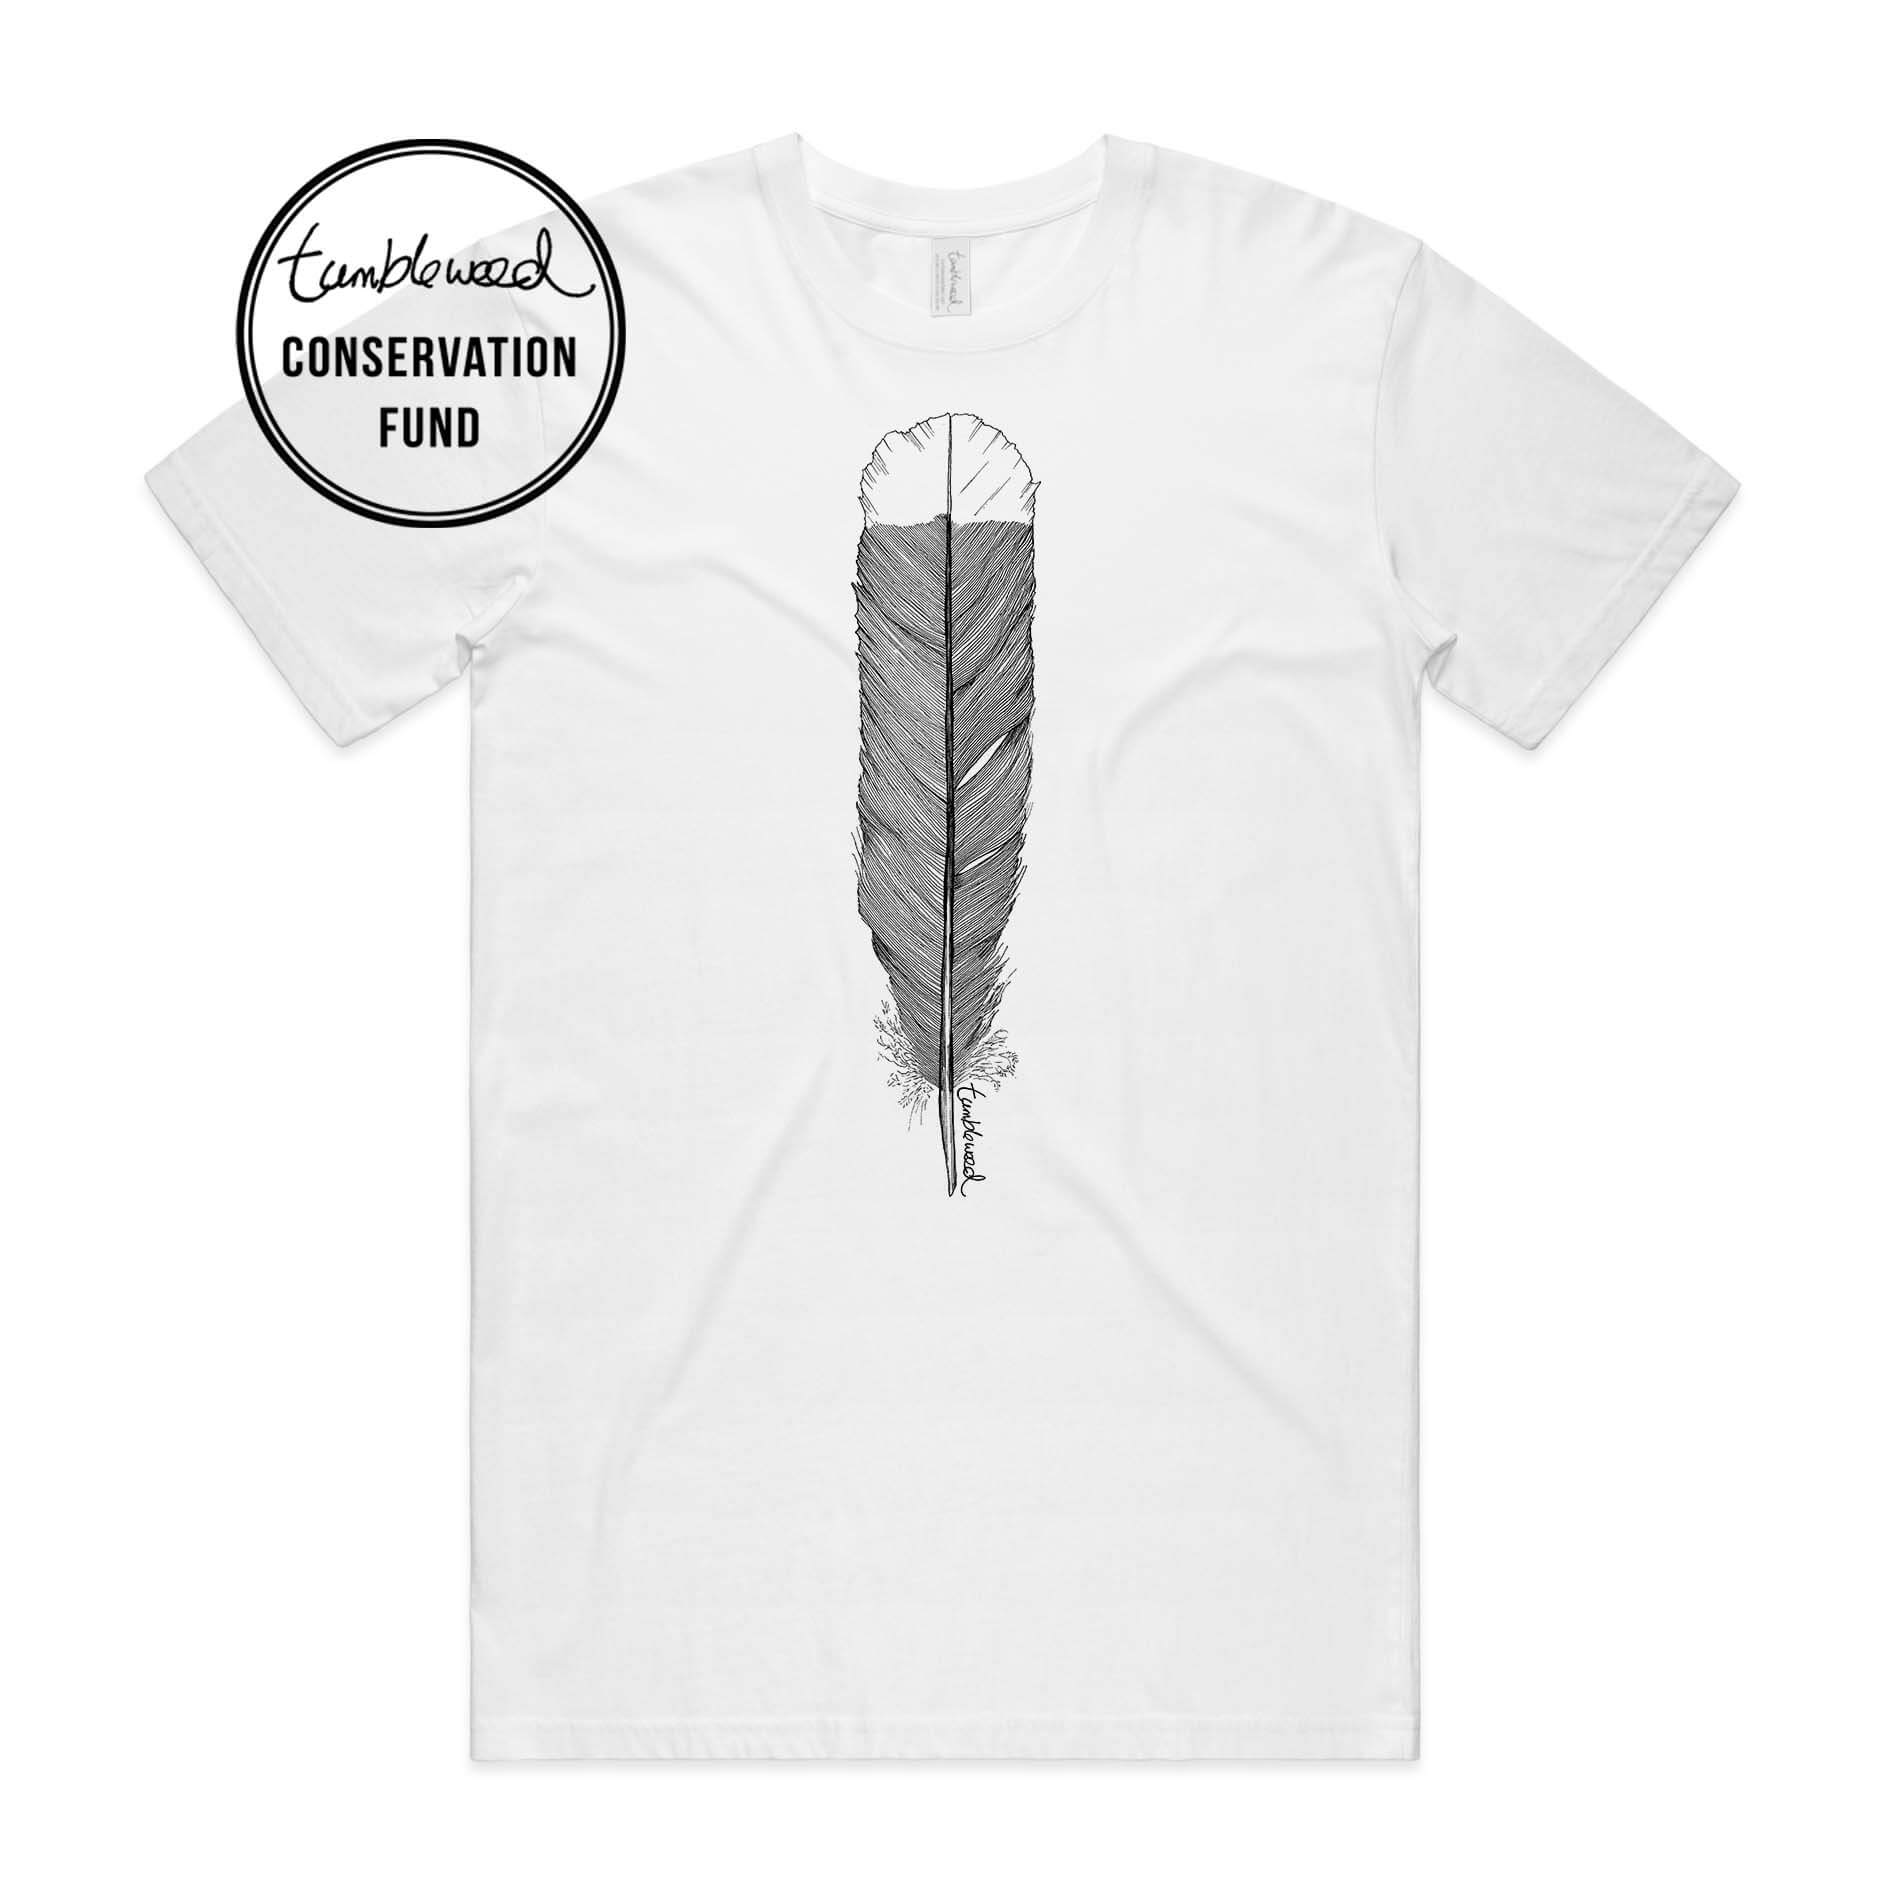 White, female t-shirt featuring a screen printed huia feather design.